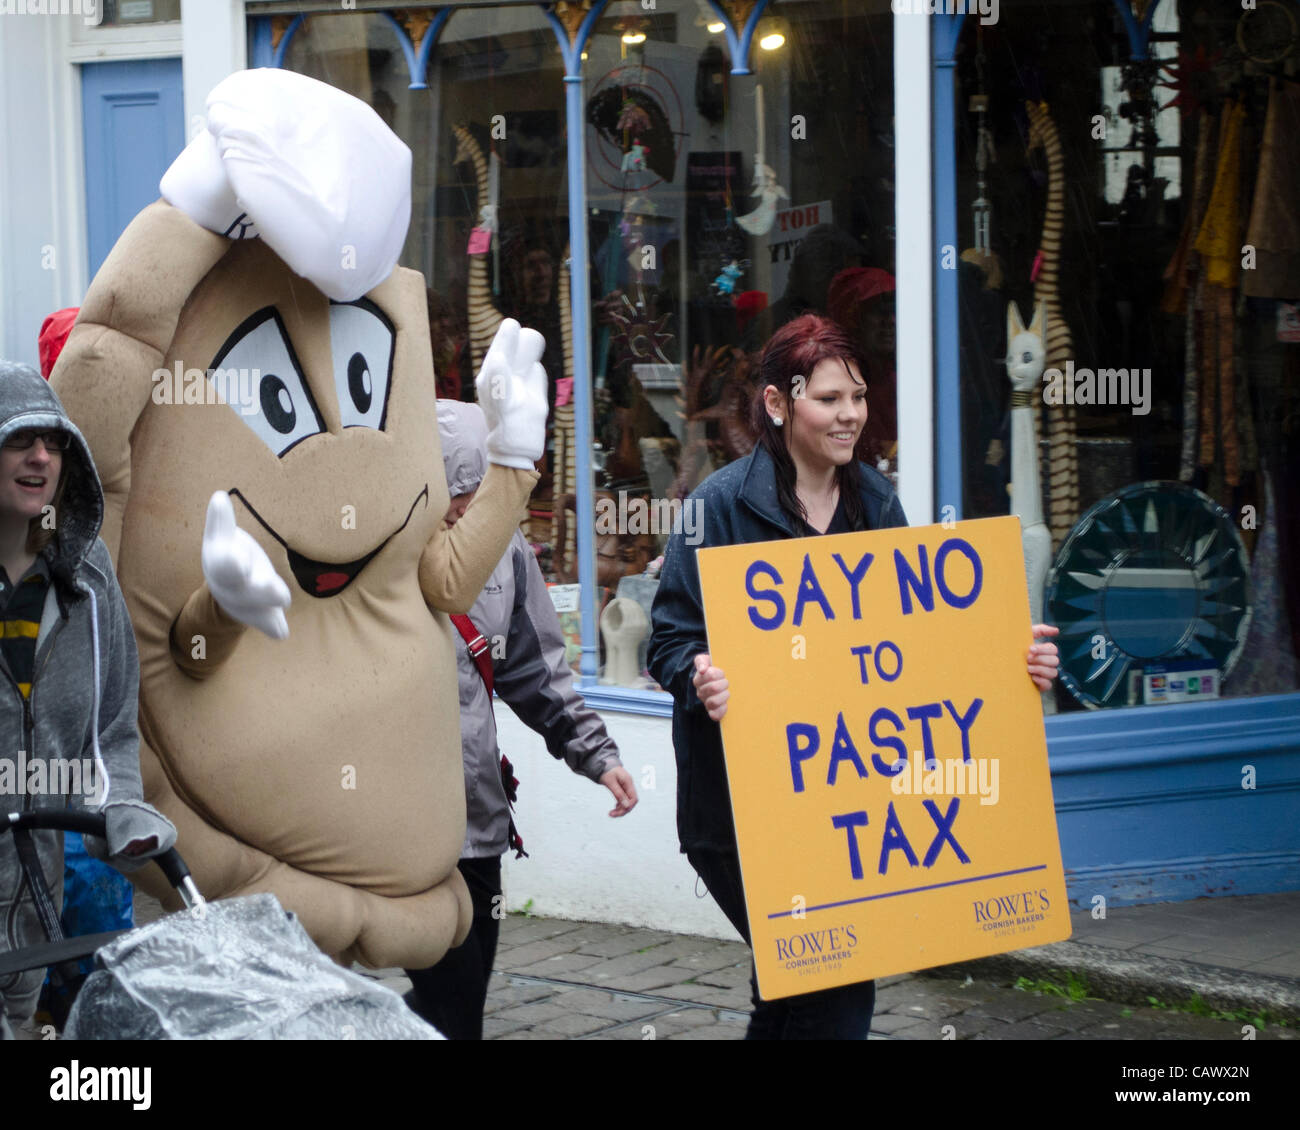 Falmouth, Cornwall. 29 April, 2012. Hundreds of people walk through the streets of Falmouth, Cornwall, in protest against the so-called "pasty tax" being proposed by the Government. Stock Photo